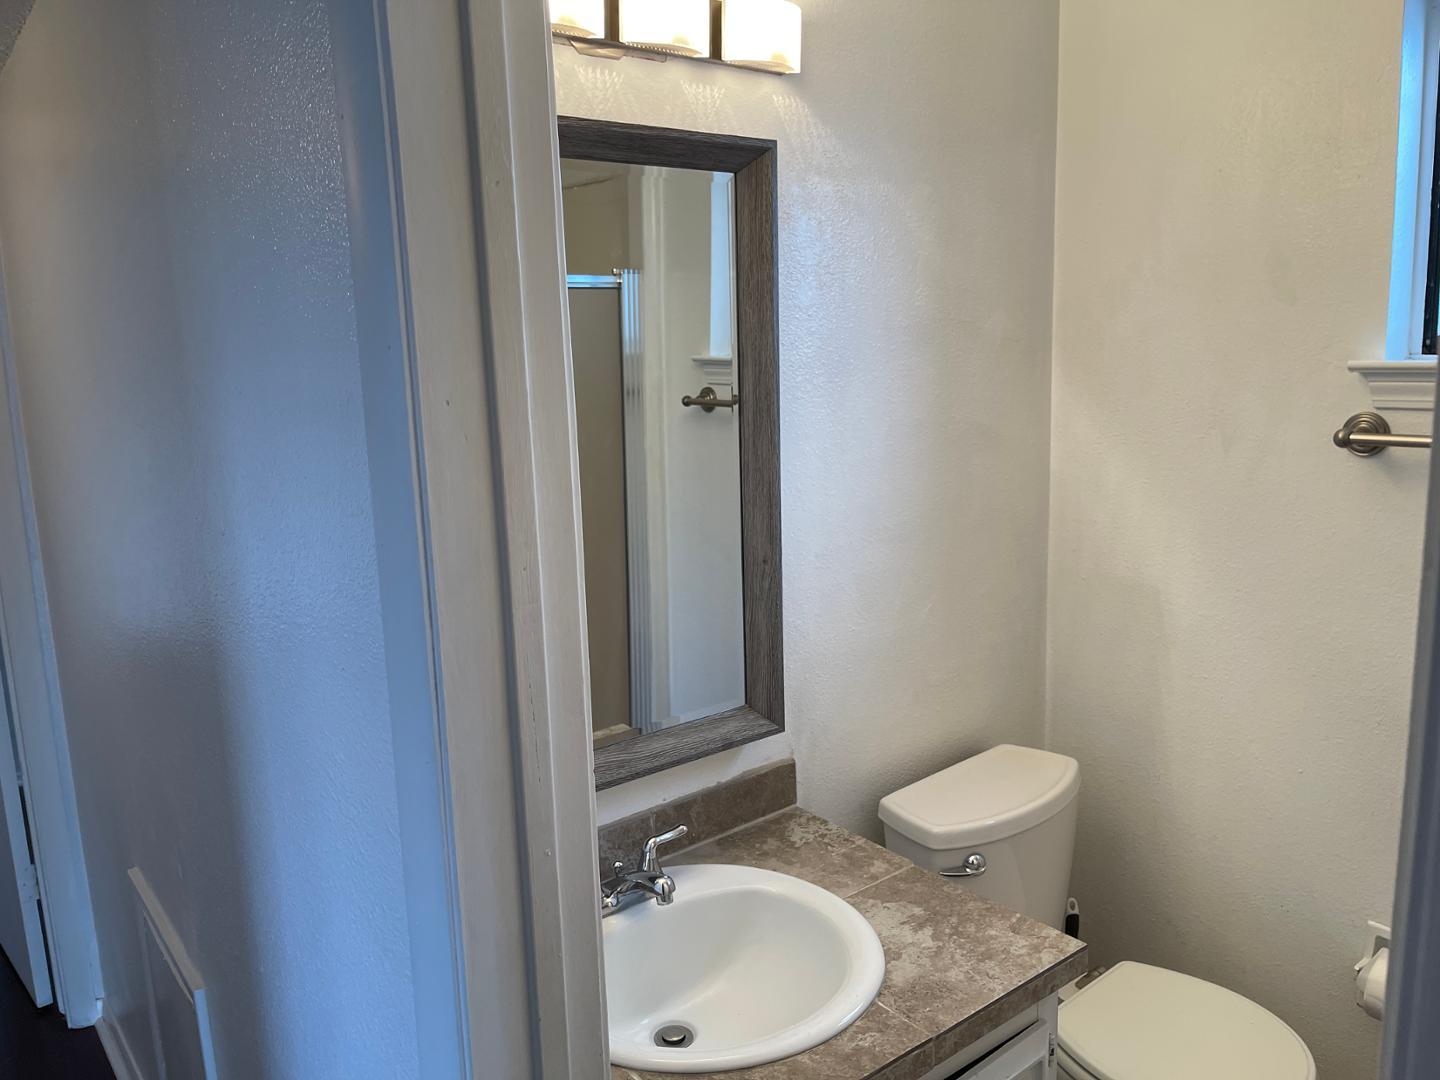 3808 Lafayette Drive, Albuquerque, New Mexico 87107, 3 Bedrooms Bedrooms, ,2 BathroomsBathrooms,Residential Lease,For Rent,3808 Lafayette Drive,1060787